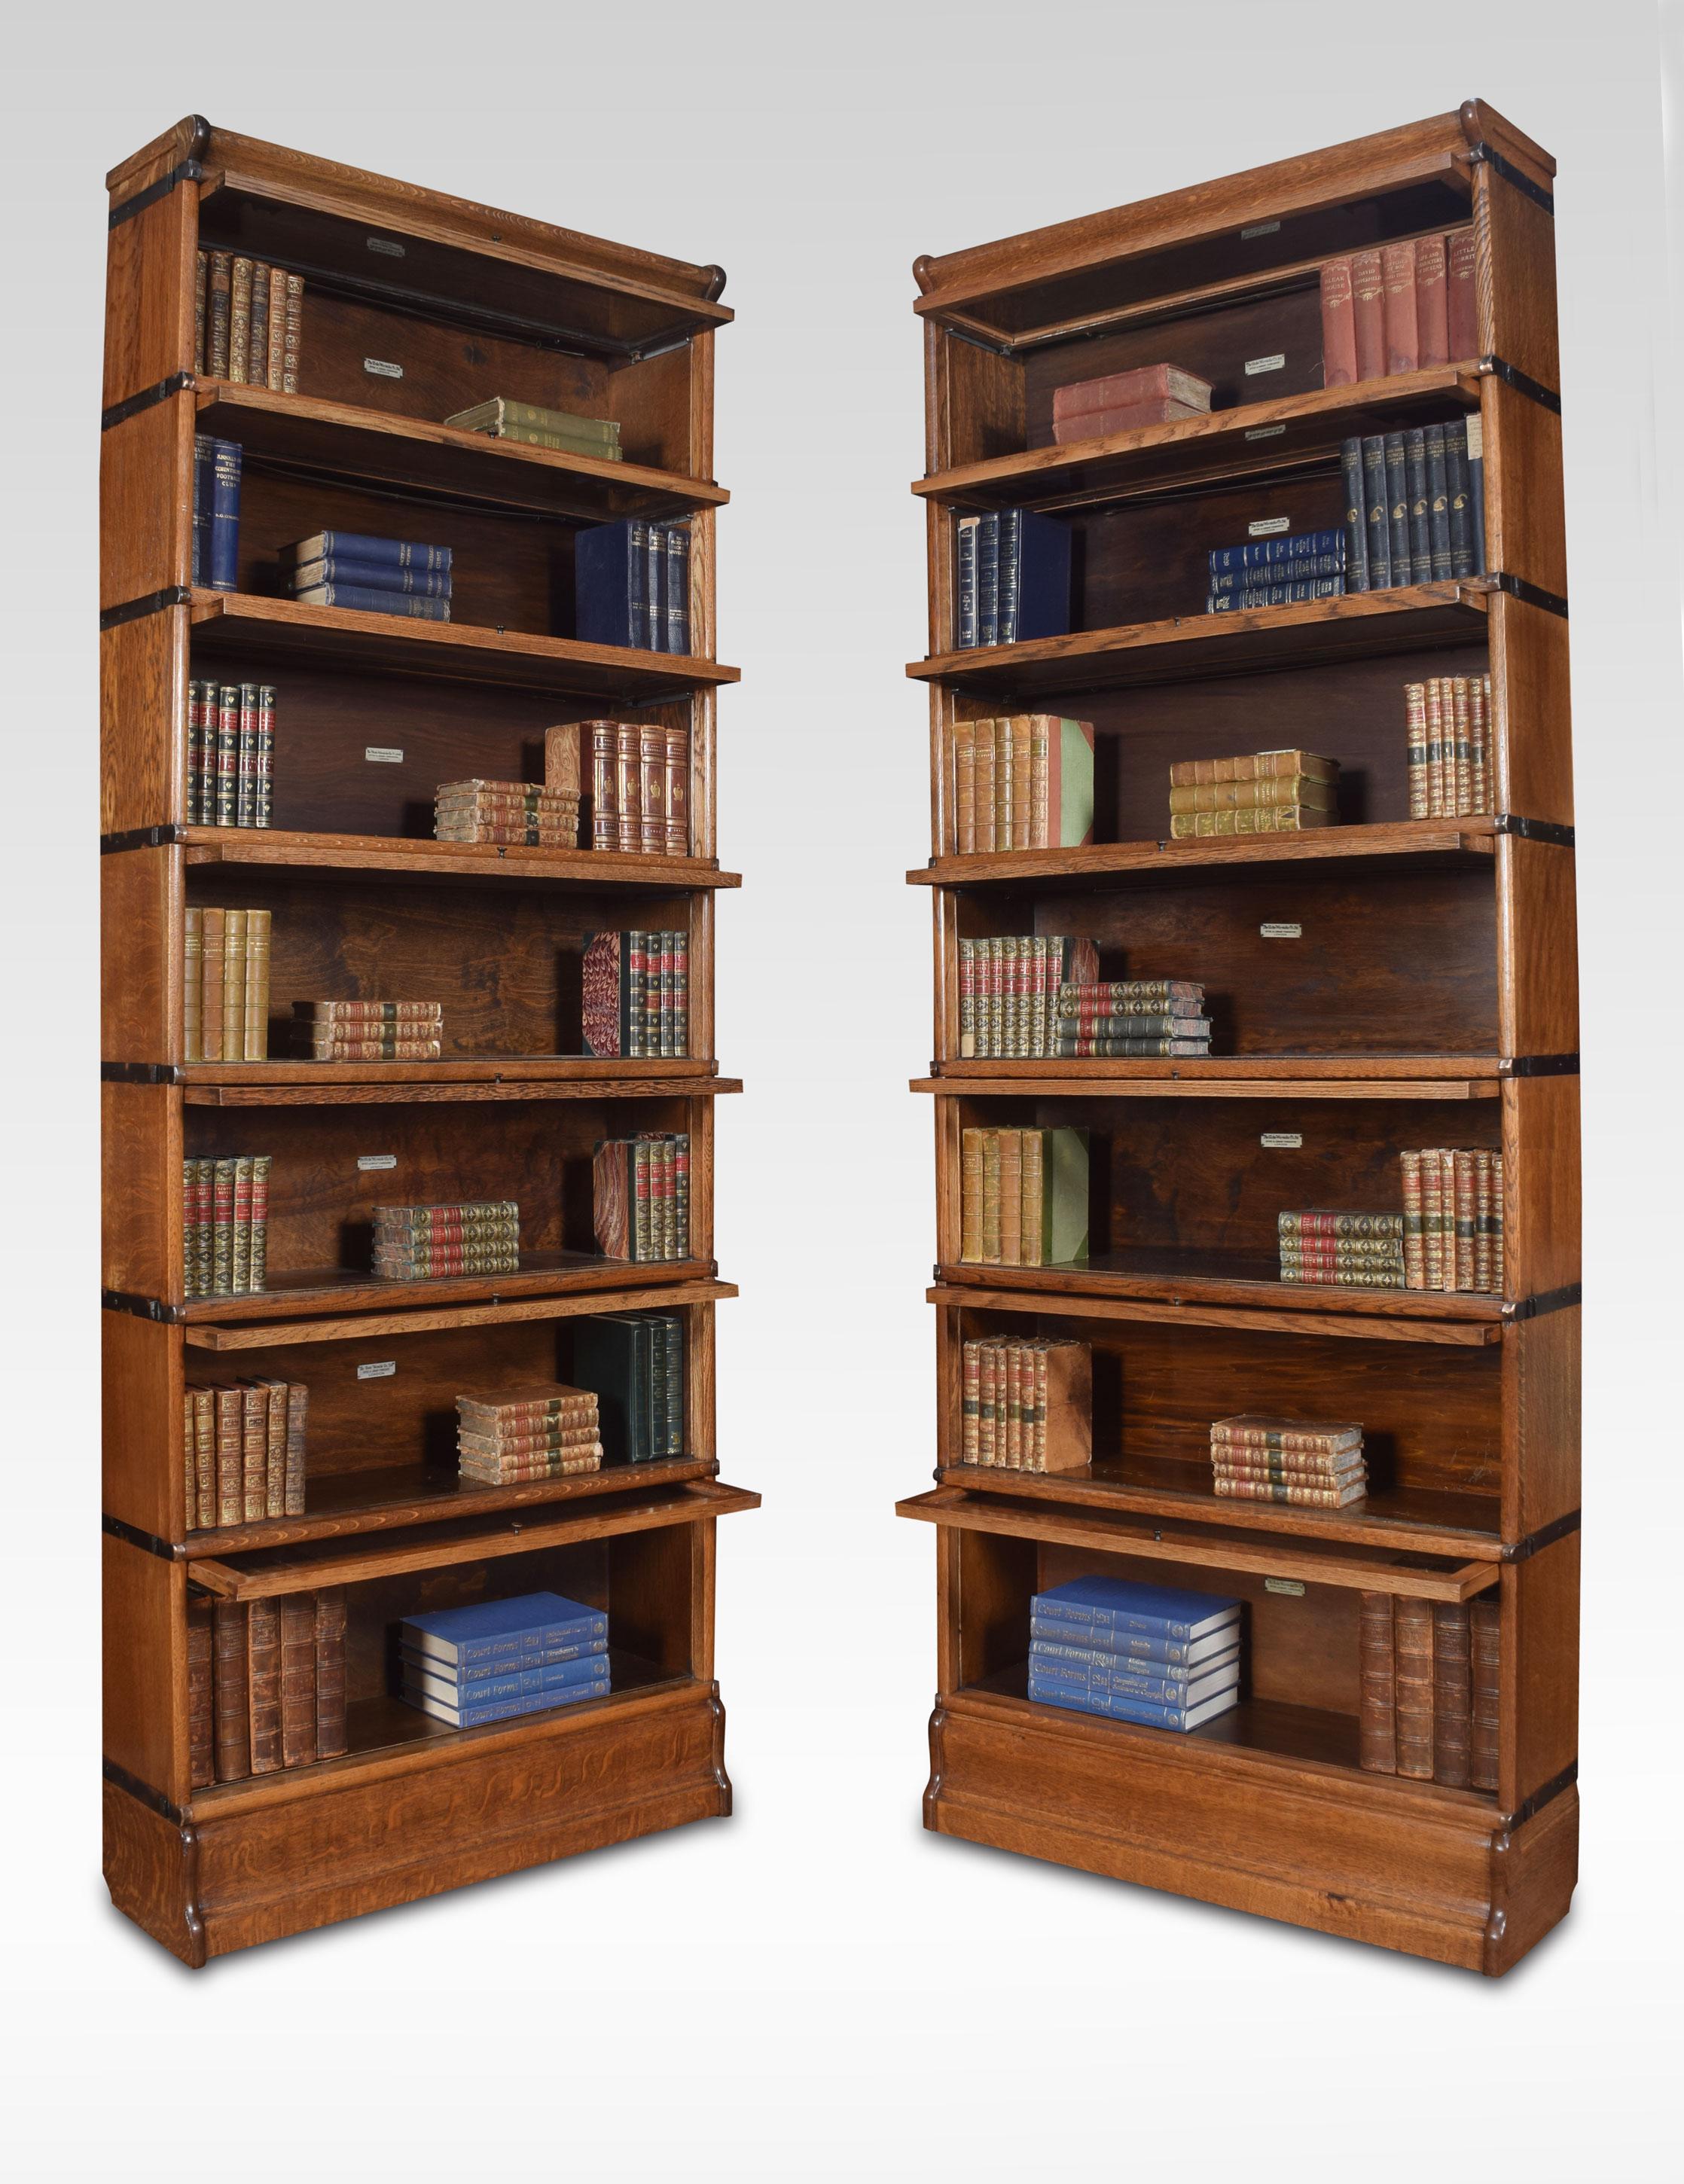 Pair of oak seven-section bookcases, the moulded top above seven section having glazed doors. All raised up on plinth base
Dimensions
Height 90.5 inches
Width 34 inches
Depth 11 inches.